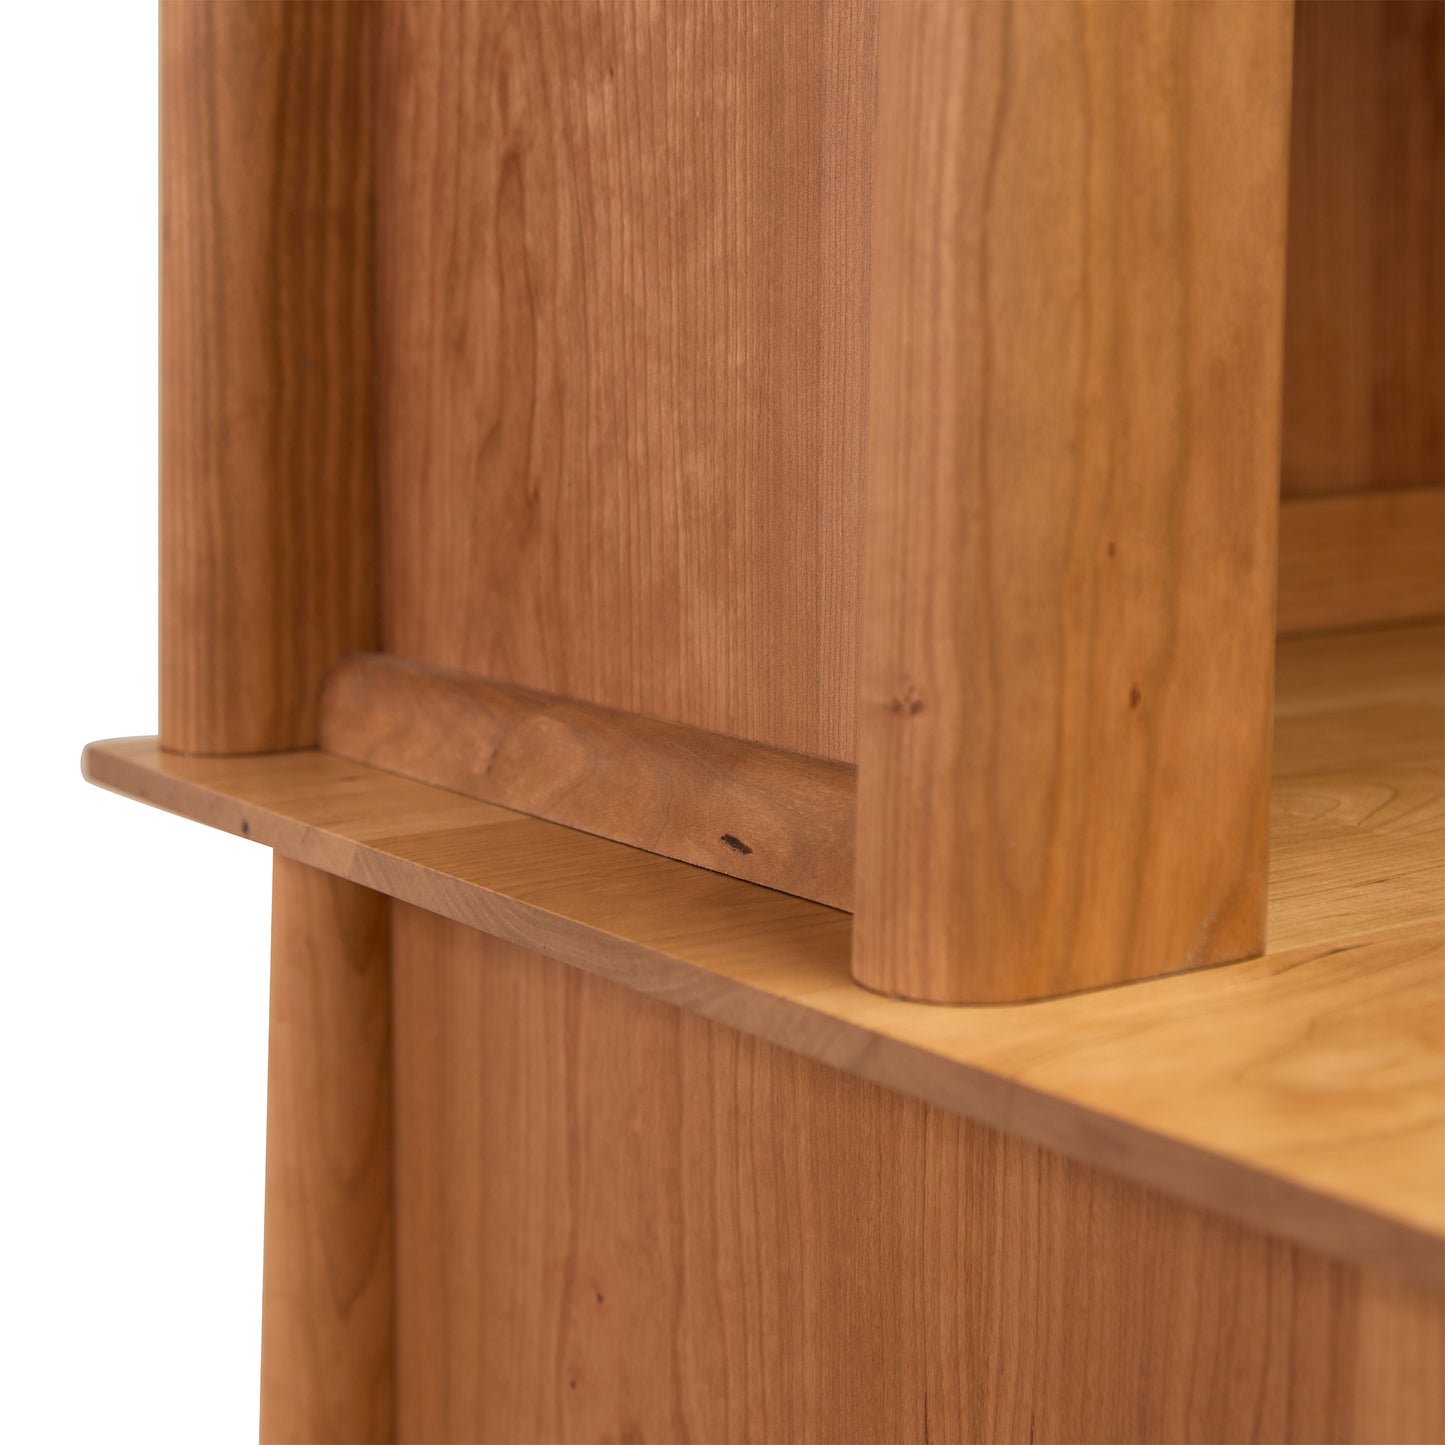 Close-up of a Maple Corner Woodworks Cherry Moon Small China Cabinet with visible grain, showcasing seamless joinery against a light background.